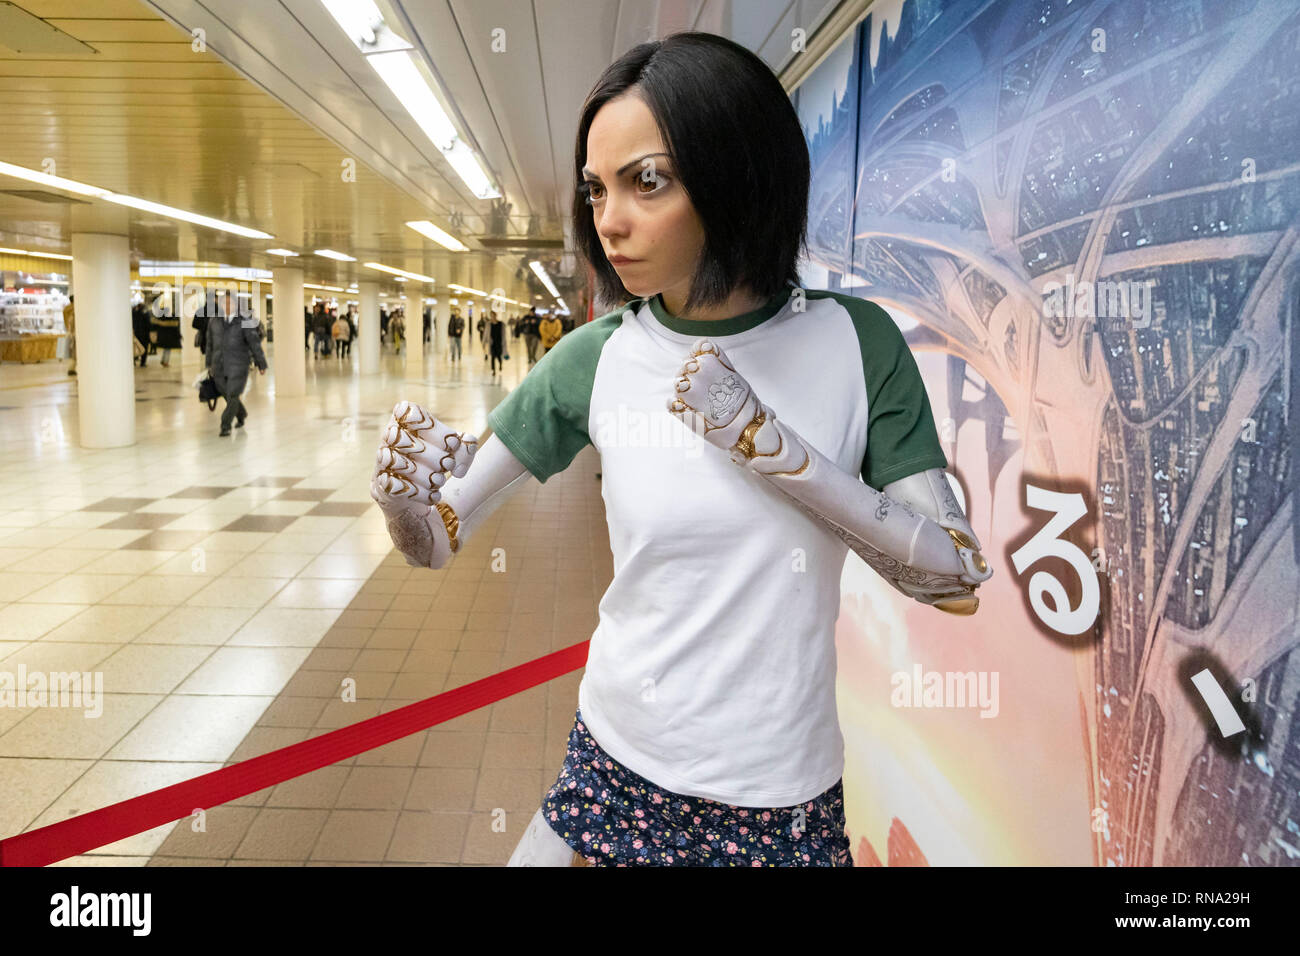 A life-size statue of Alita is seen in a corridor of Shinjuku Station on February 16, 2019, Tokyo, Japan. There are two life-size statues promoting ''Alita: Battle Angel'' film in Shinjuku Station. The film will be released in Japan on February 22. Credit: Rodrigo Reyes Marin/AFLO/Alamy Live News Stock Photo